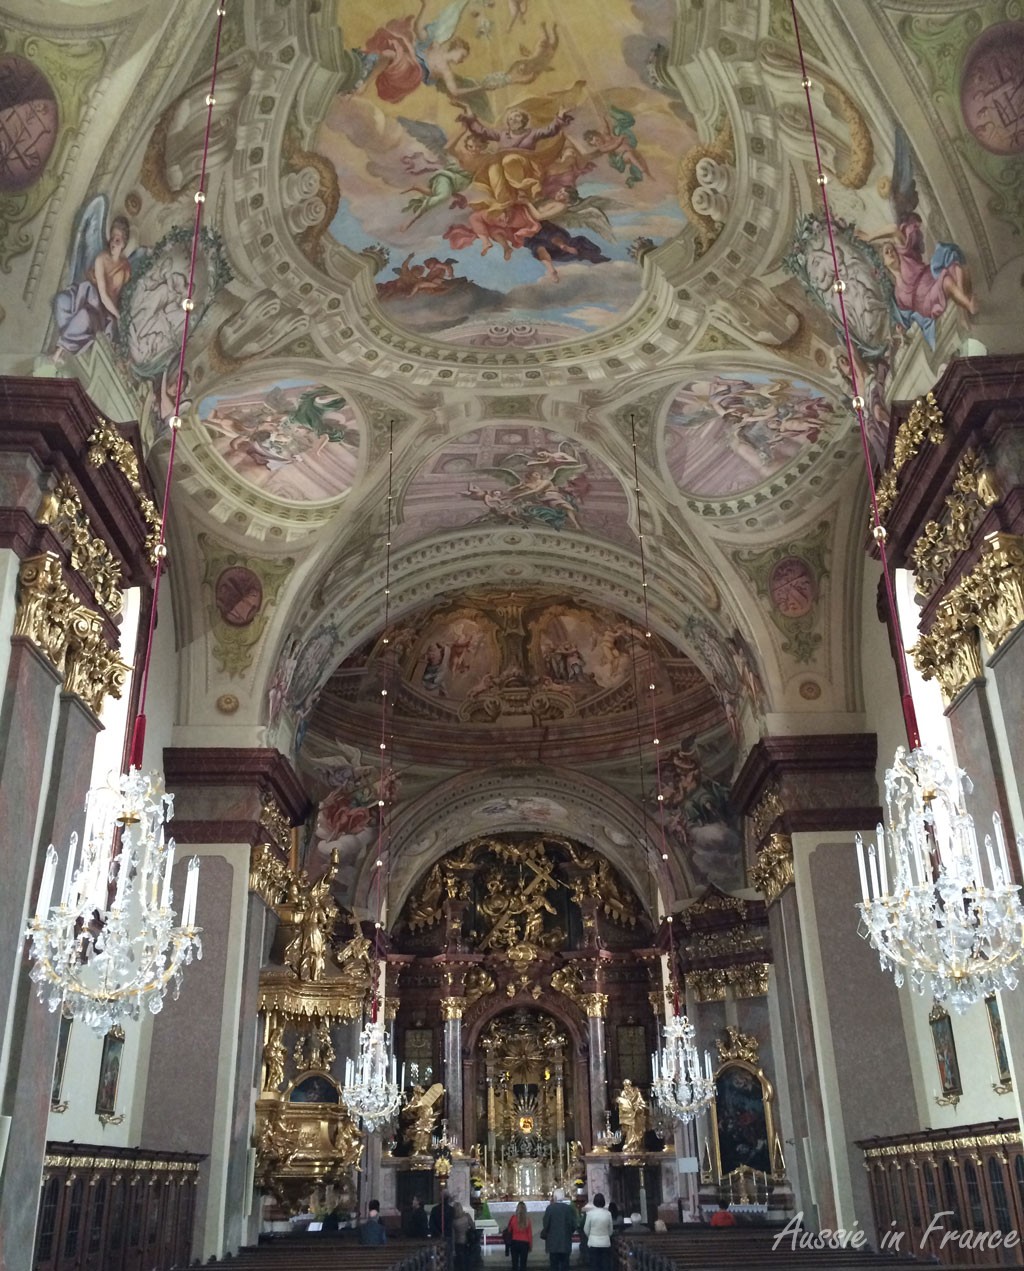 The main altar and painted ceilings